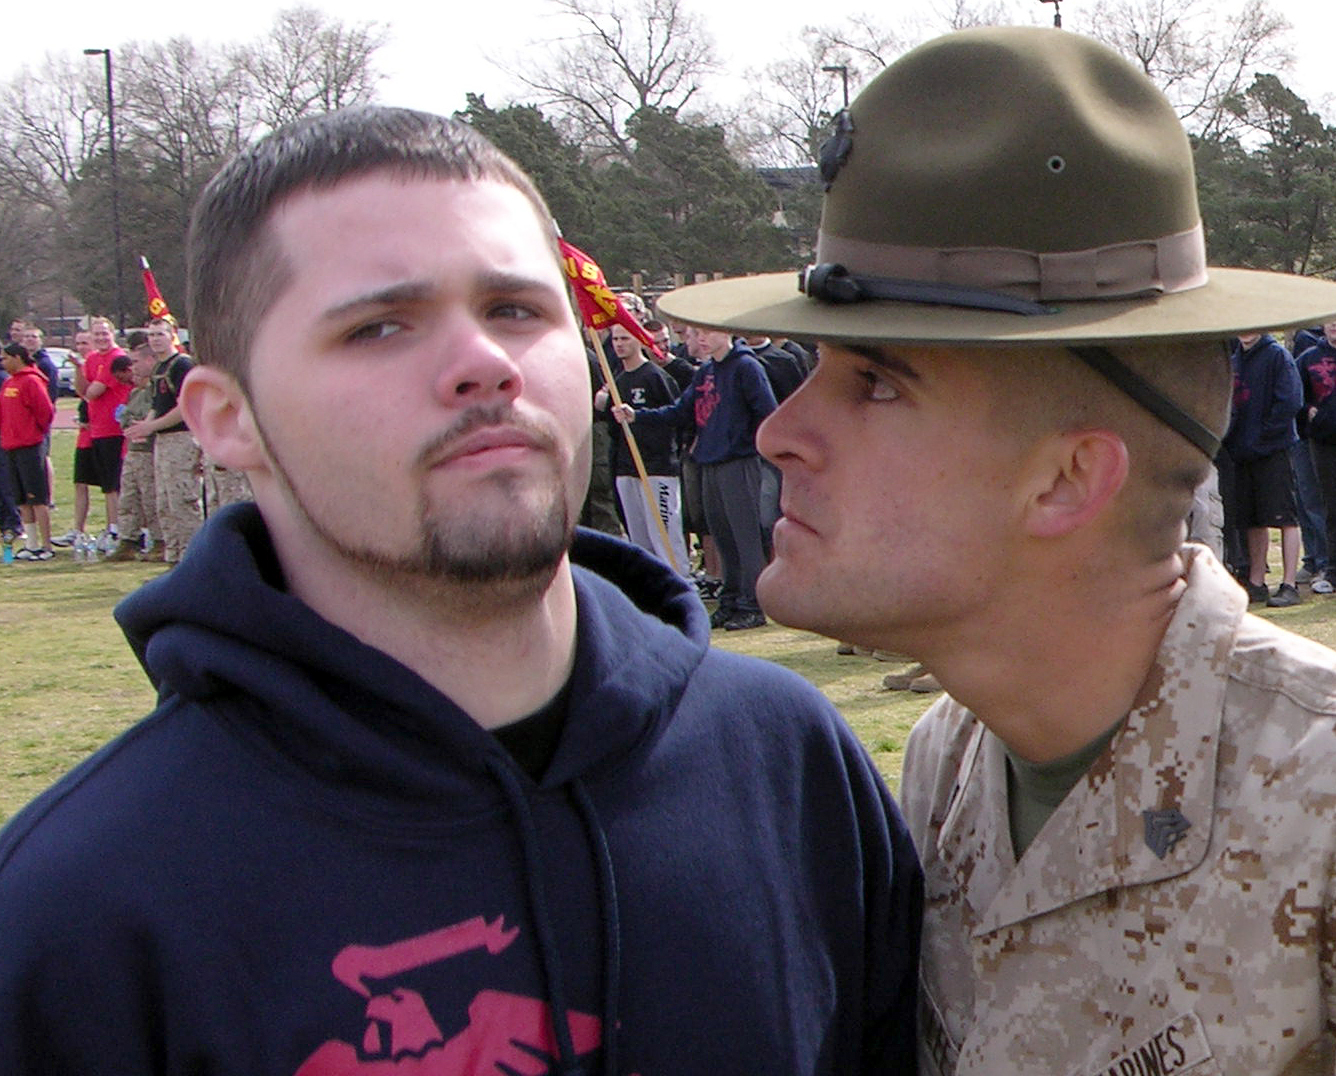 A drill sergeant leans in close towards a young man.